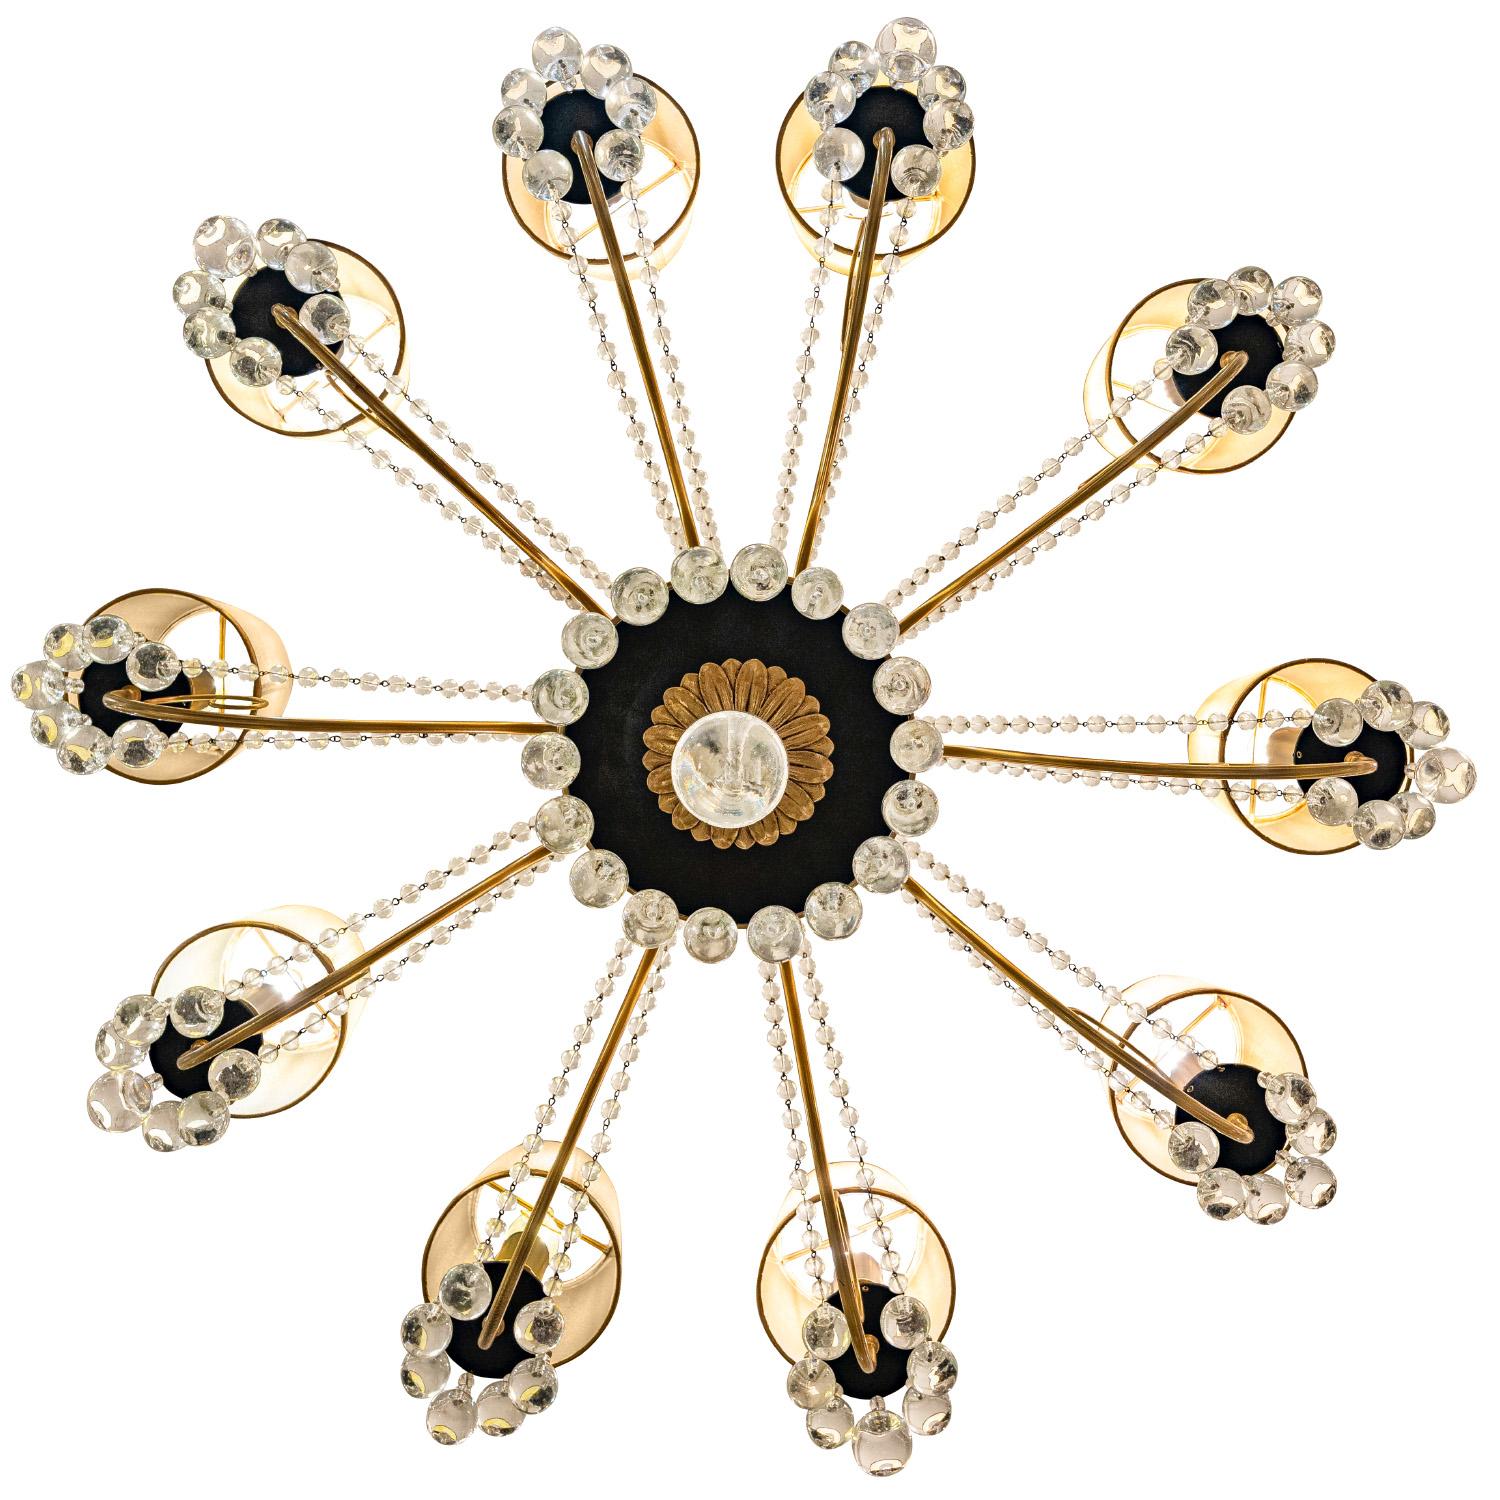 American Tommi Parzinger Attributed Elegant 10 Arm Chandelier with Crystals 1950s For Sale